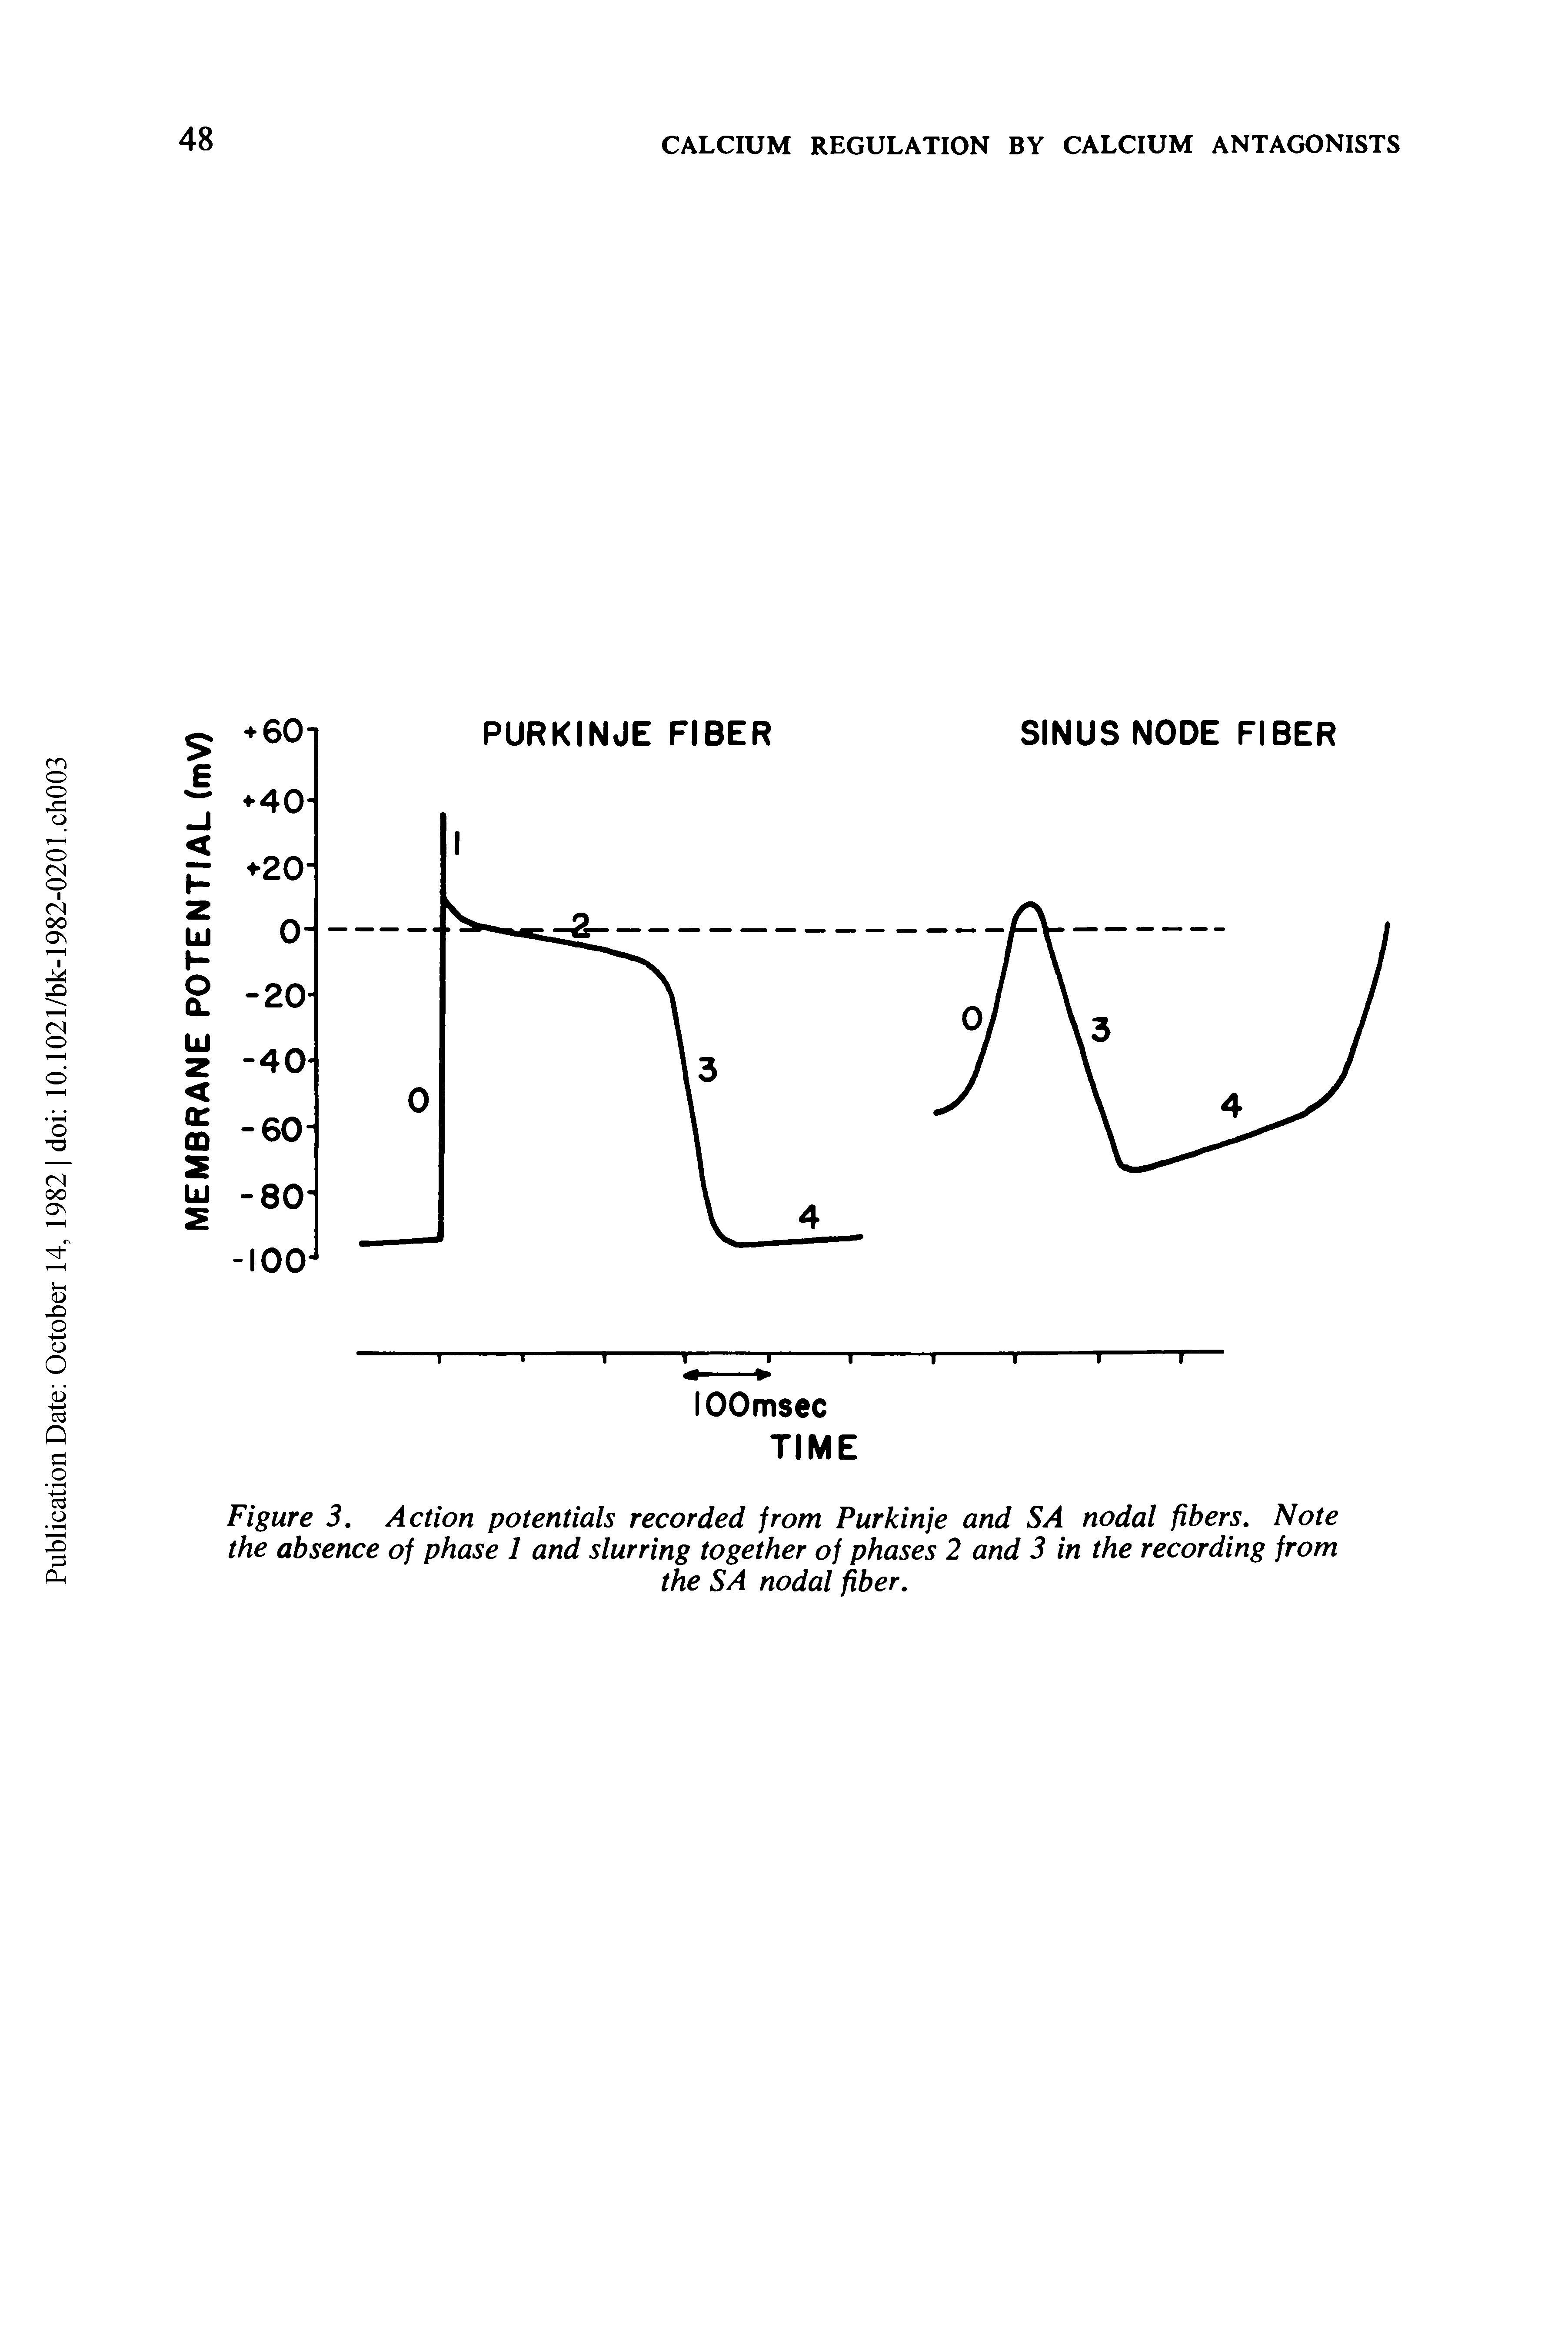 Figure 3. Action potentials recorded from Purkinje and SA nodal fibers. Note the absence of phase 1 and slurring together of phases 2 and 3 in the recording from...